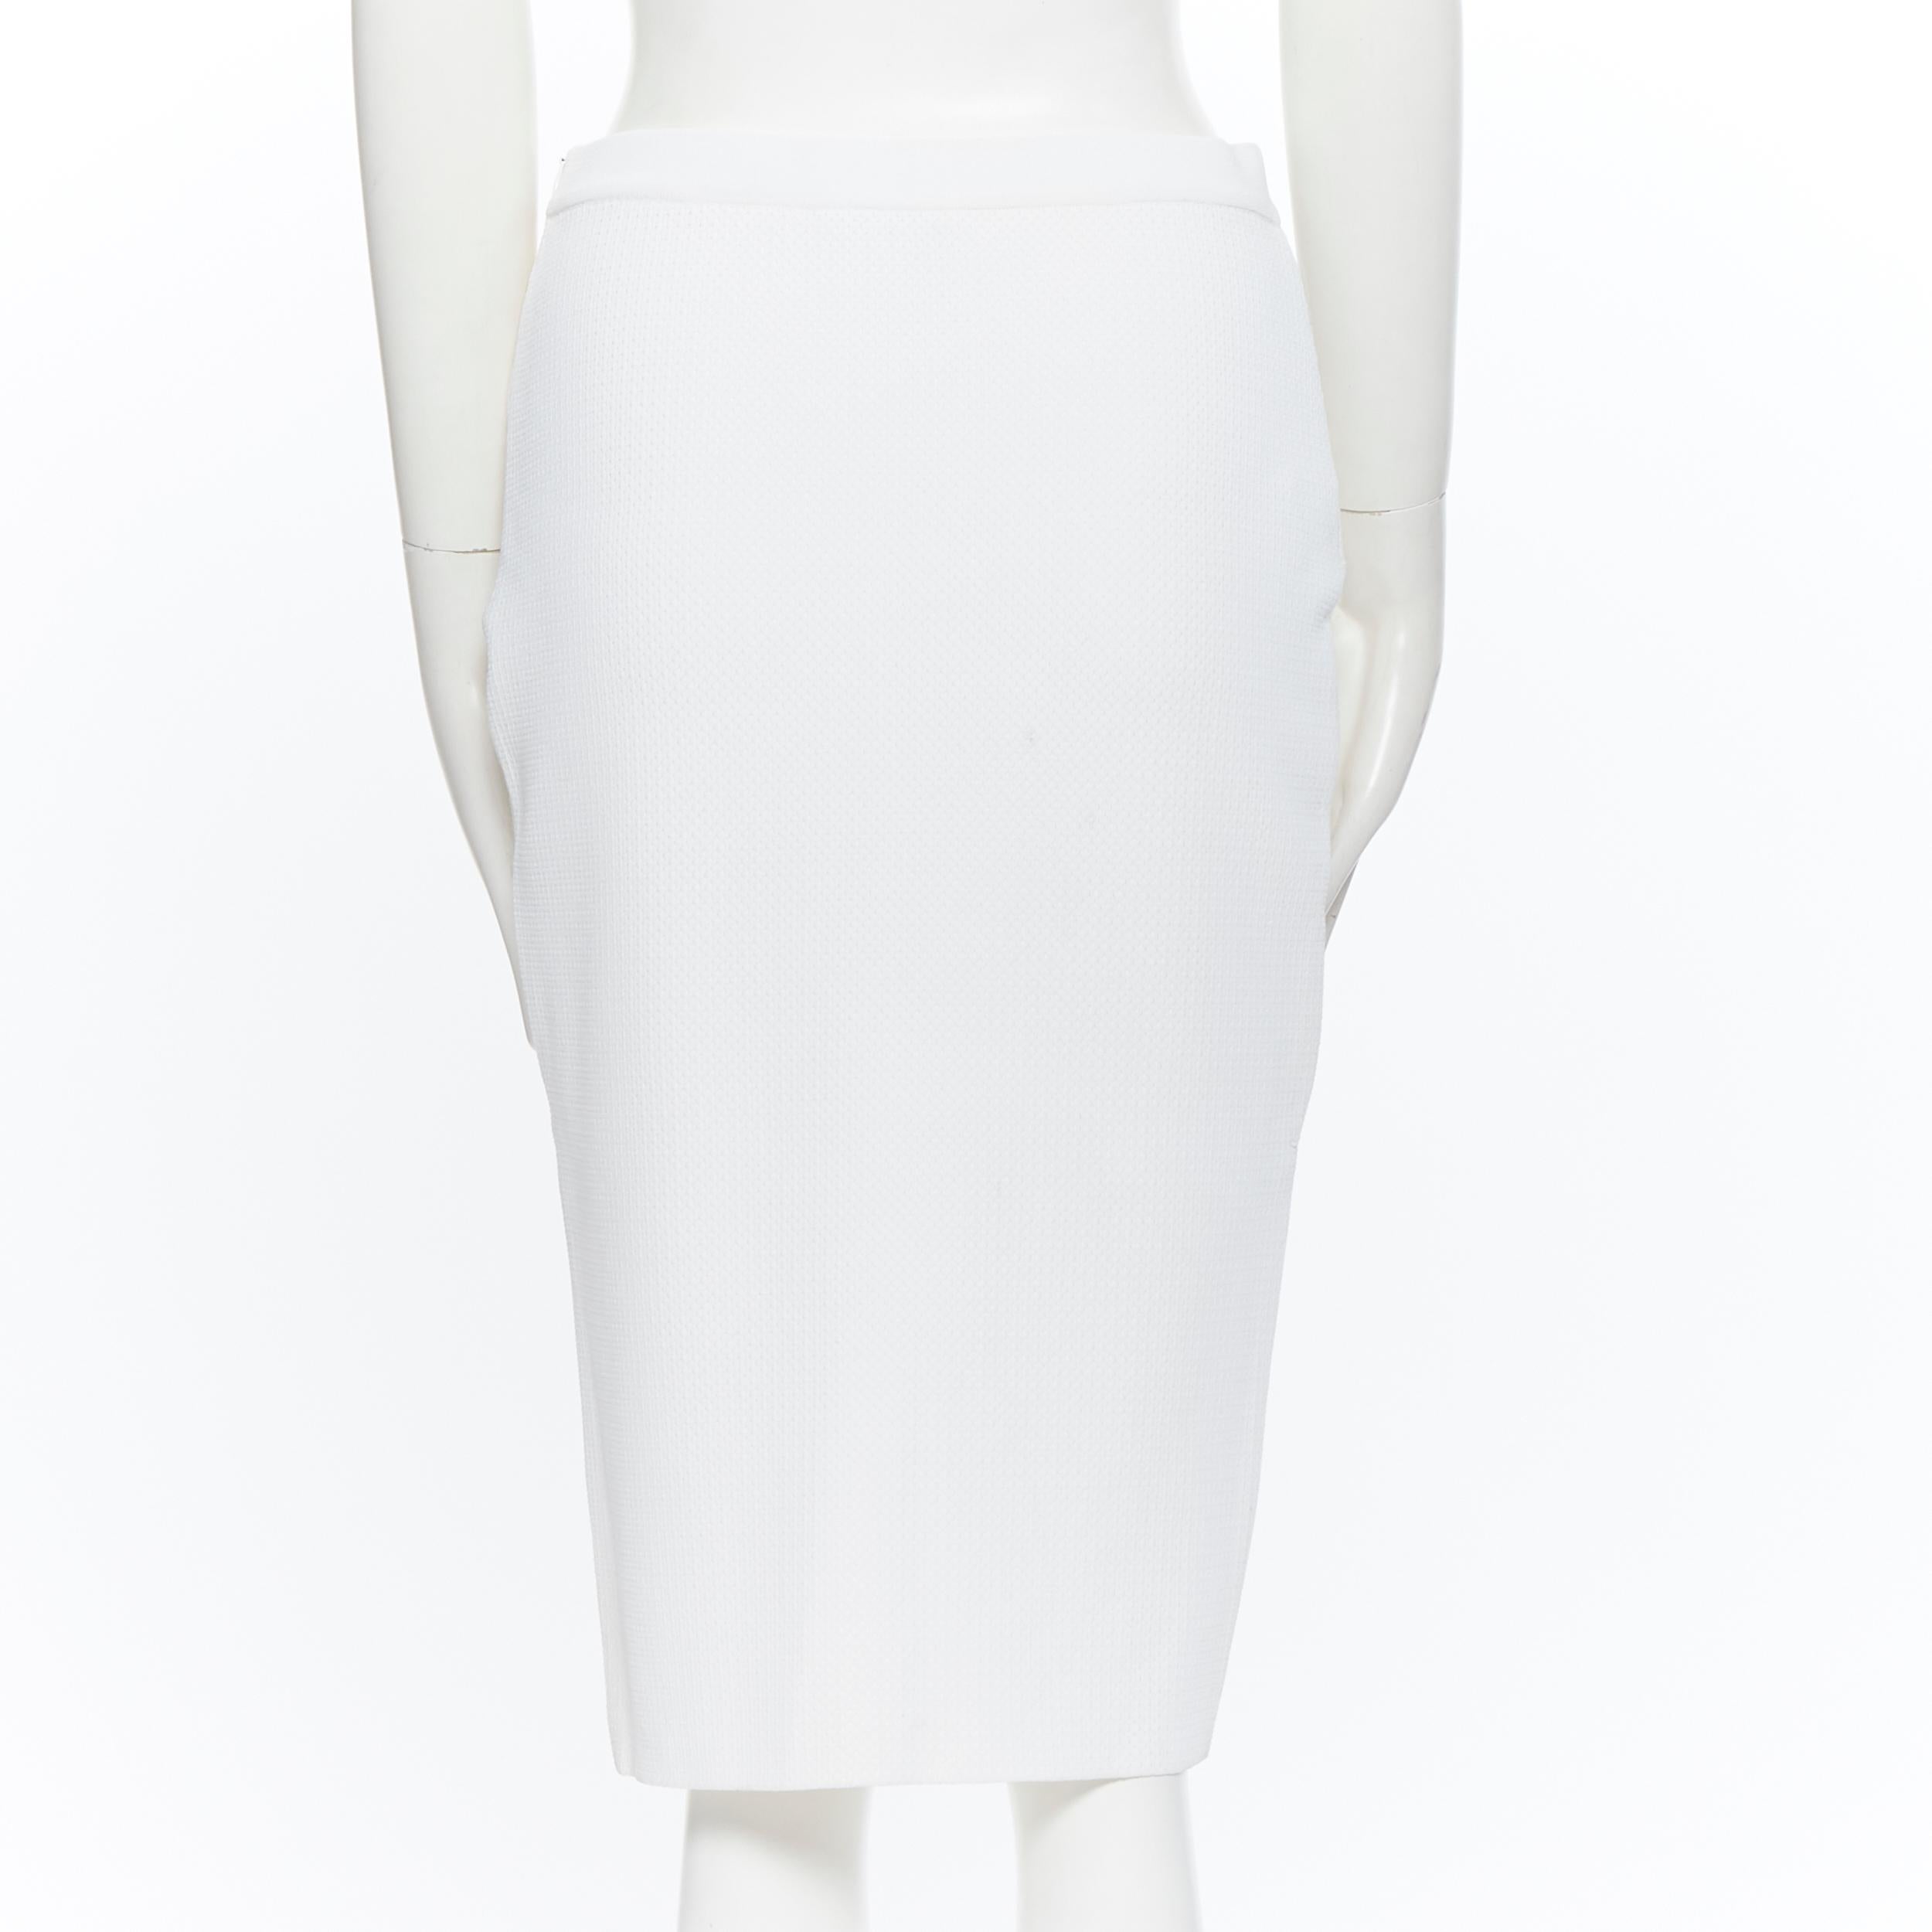 Gray GIVENCHY TISCI viscose blend knitted white curved front bodycon skirt M 27